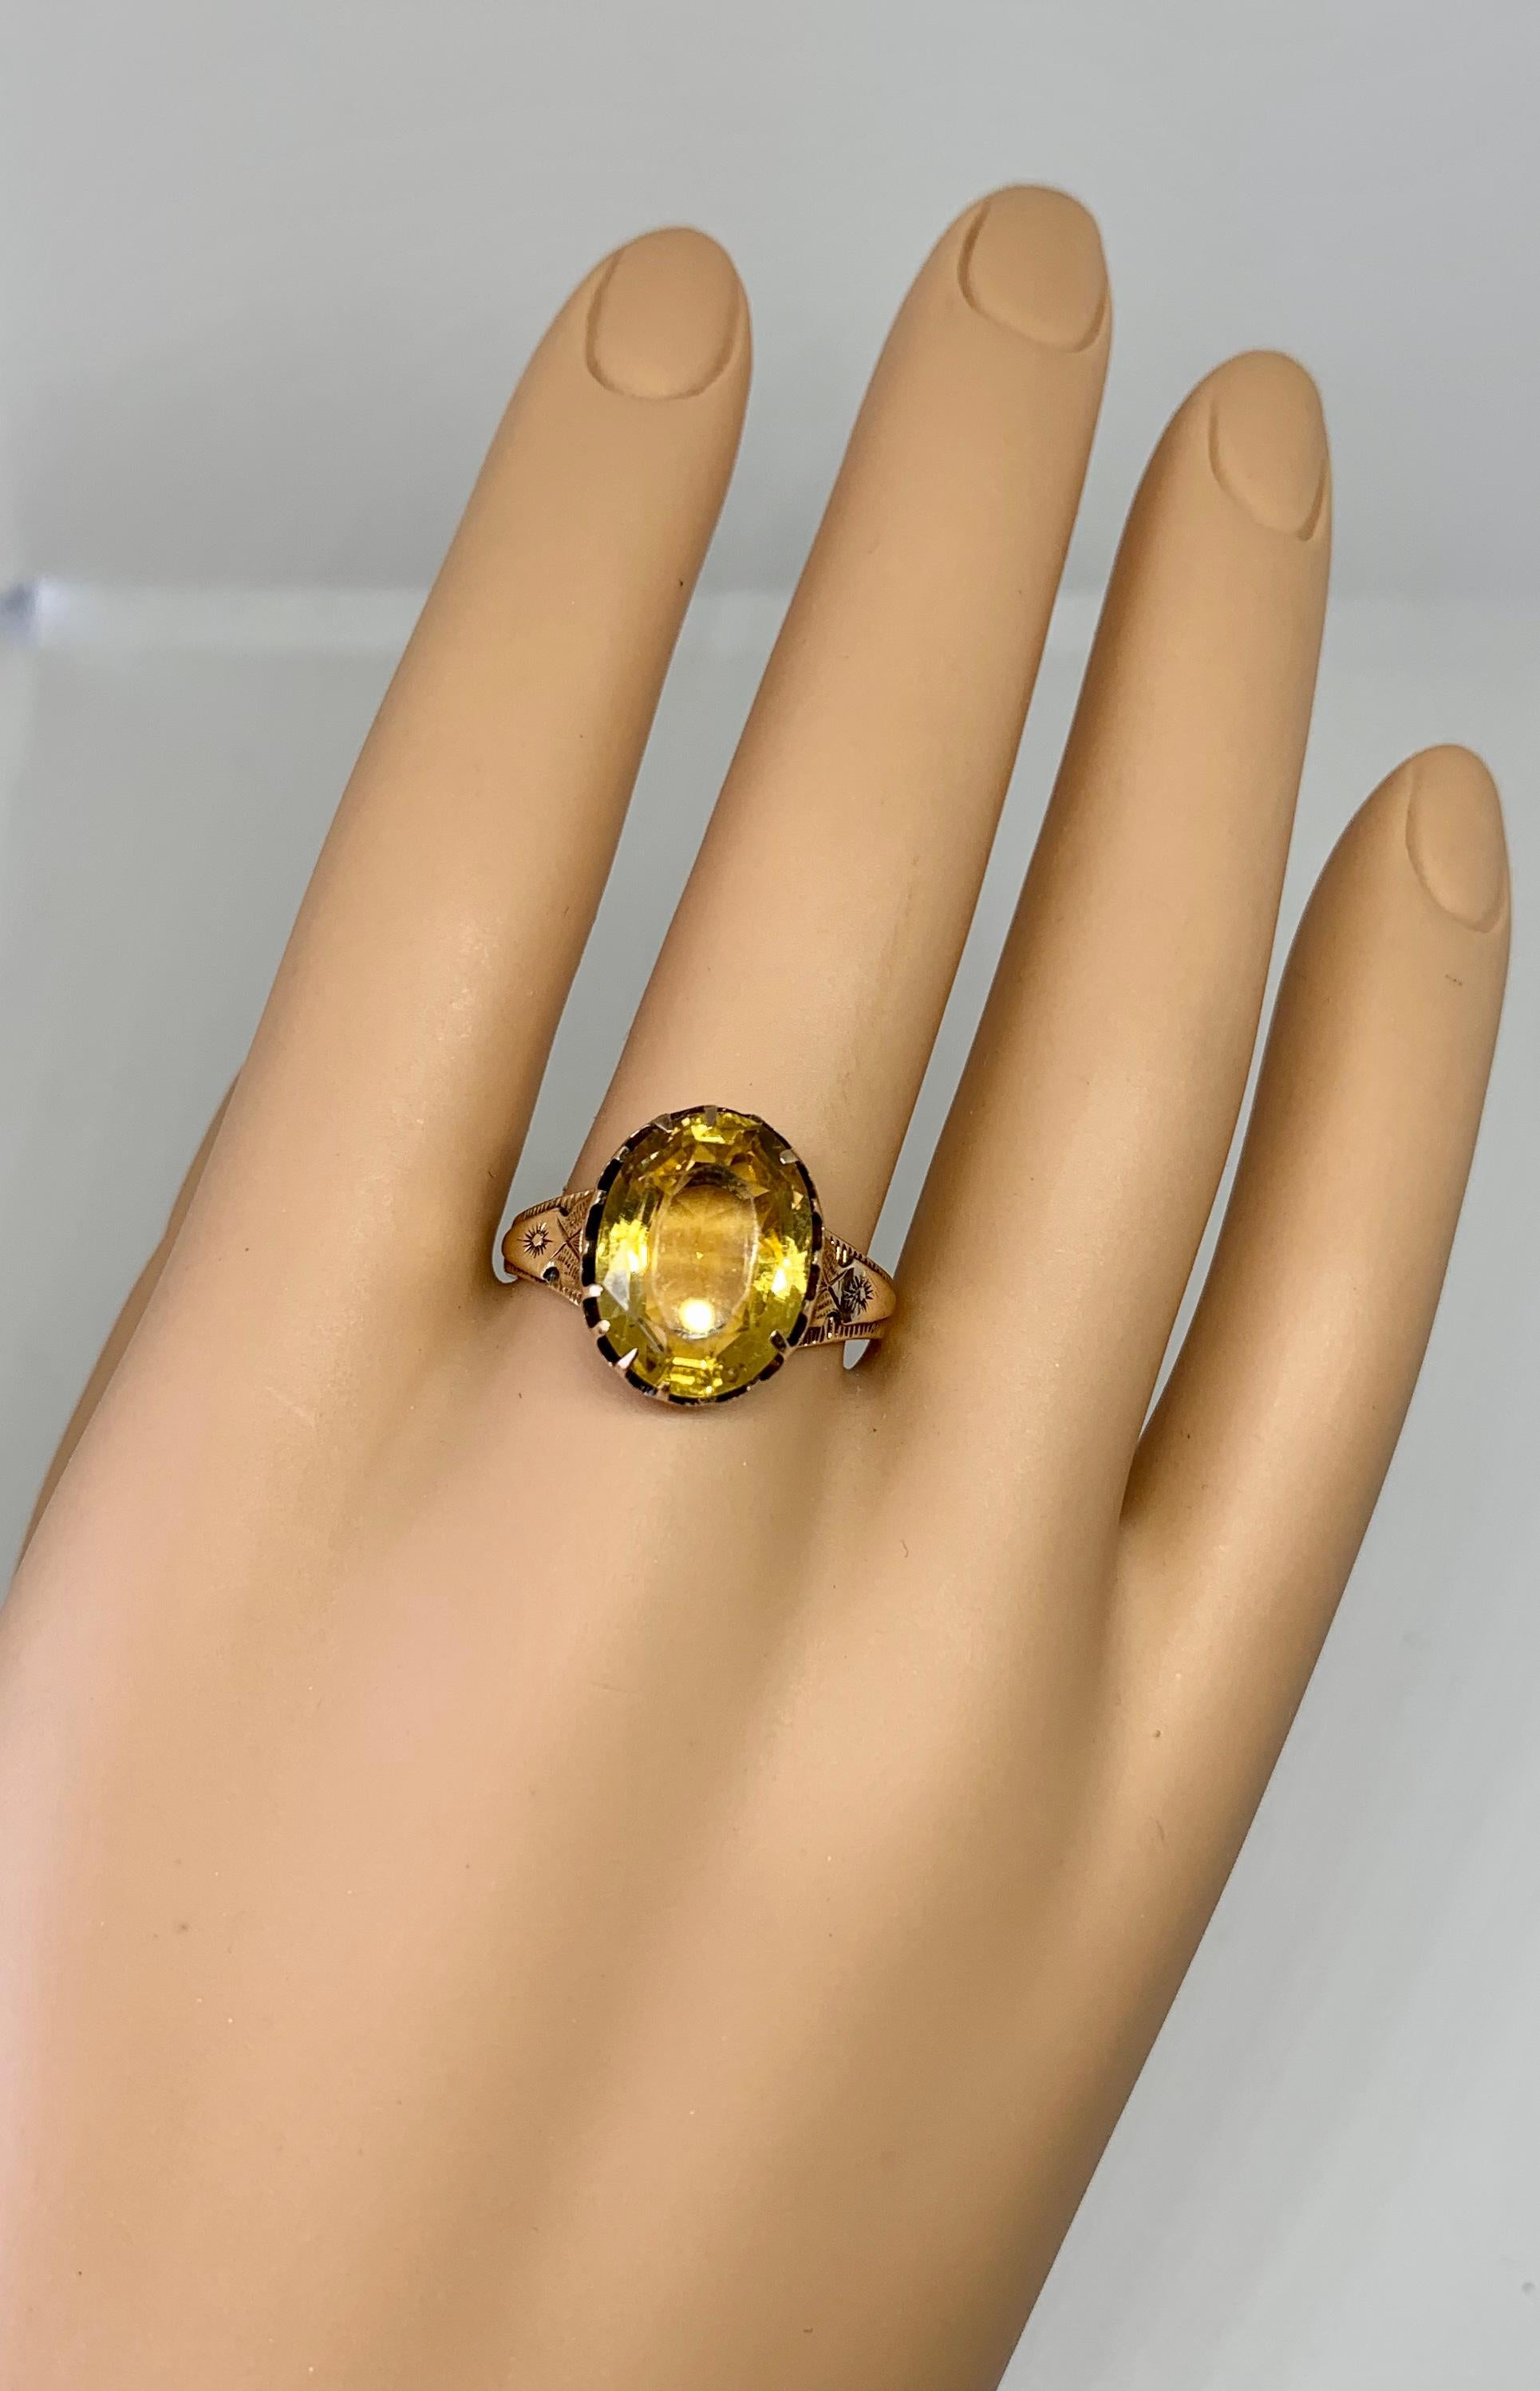 This is an absolutely magnificent antique Victorian Belle Epoque 5.25 Carat Citrine Ring in a 10 Karat Gold setting of great beauty.   The magnificent statement ring is one of the most beautiful early antique citrine rings we have seen.  The oval